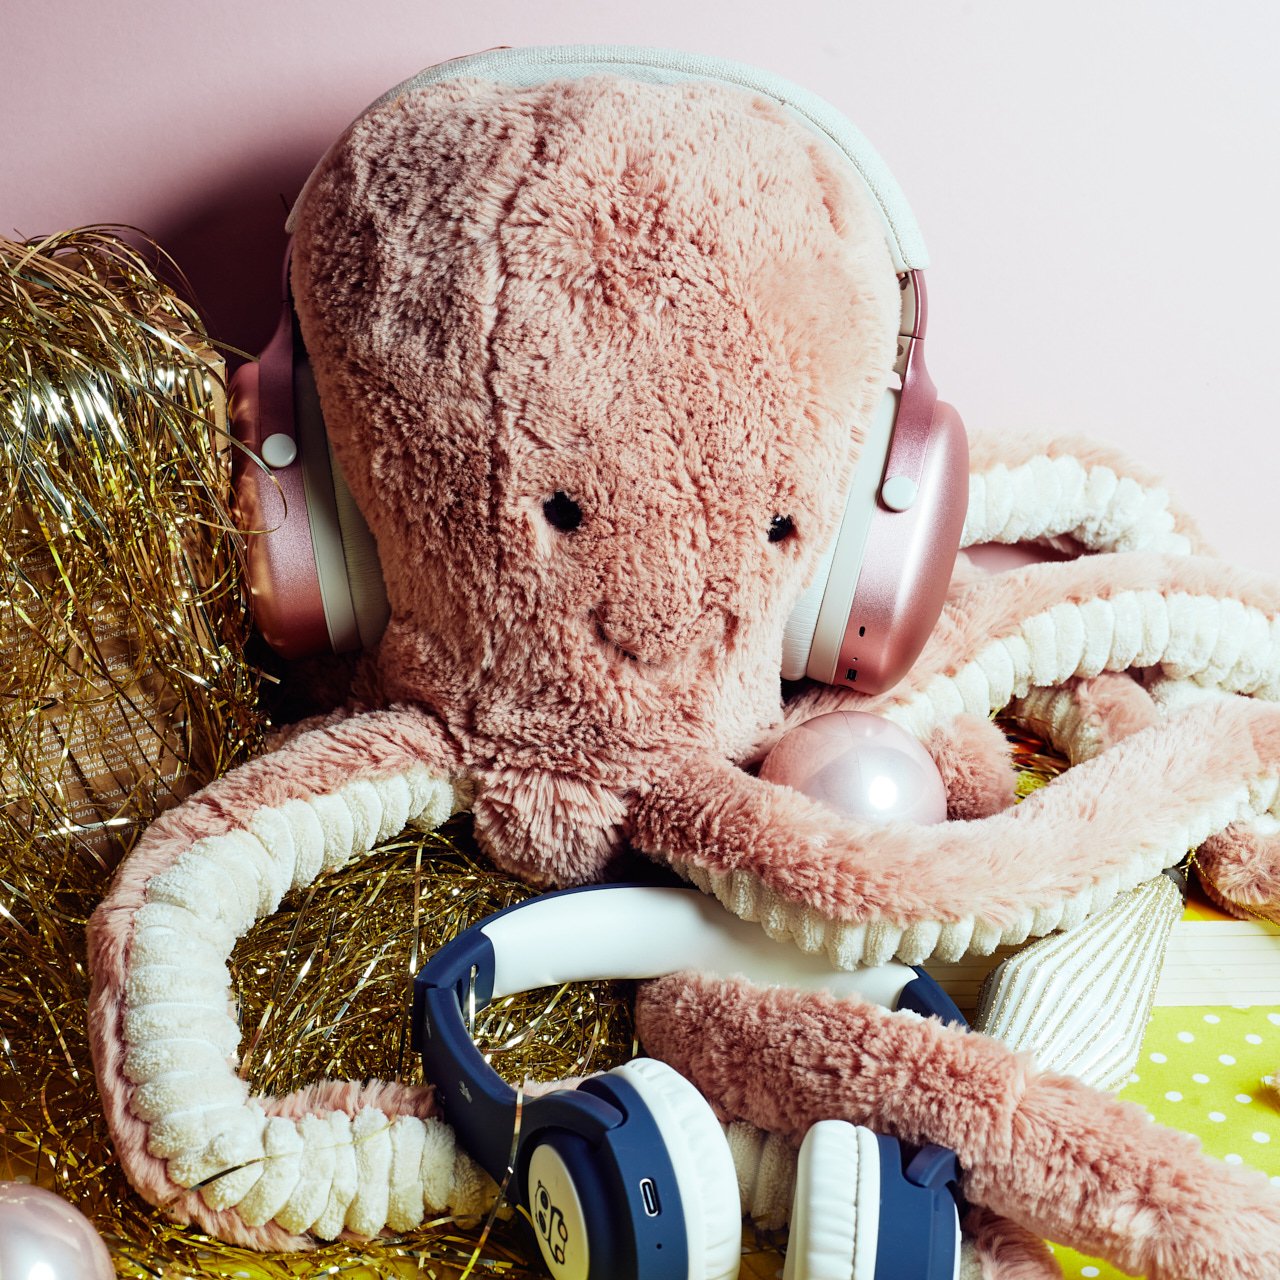  HOUSE OF MARLEY  Positive Vibration XL ANC Over-ear Headphones  £149  JELLY CAT  Odelle Octopus  £37 @ The White Company   PLANT BUDDIES  Pippin the Panda Wireless Headphones  £39.99 